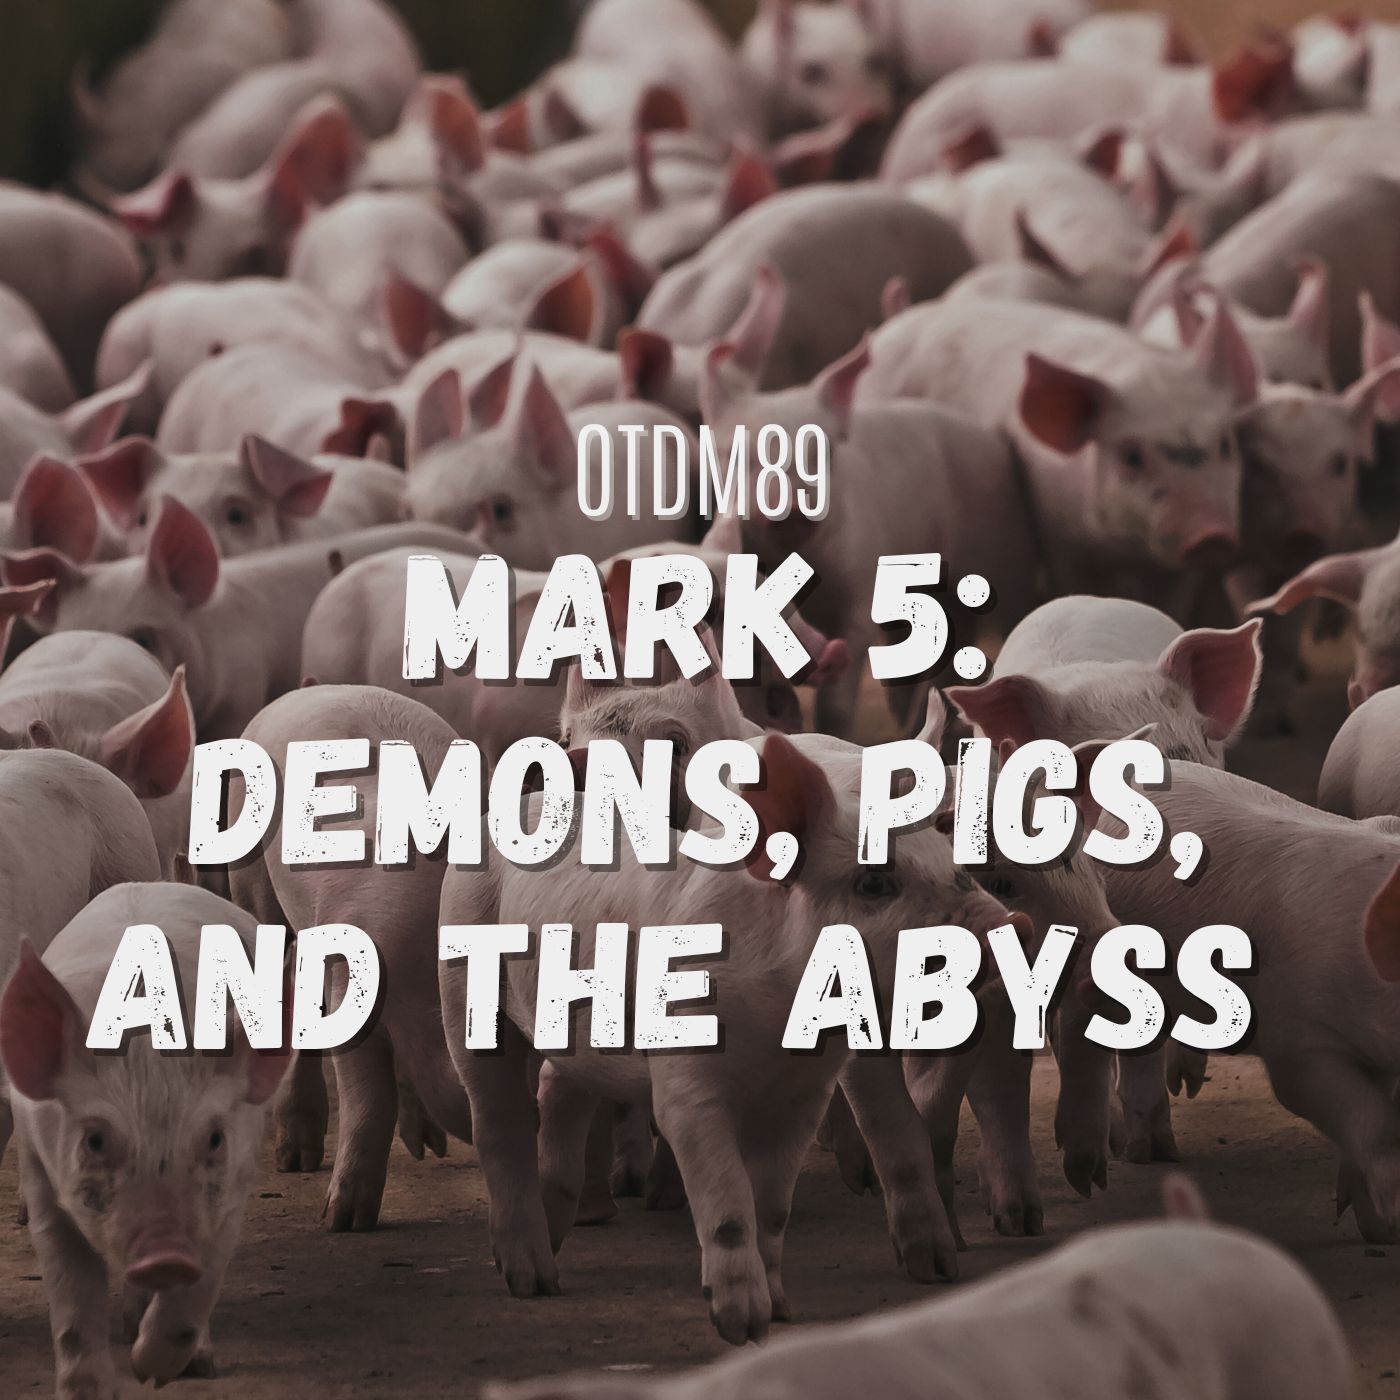 OTDM89 Mark 5: Demons, Pigs, and The Abyss